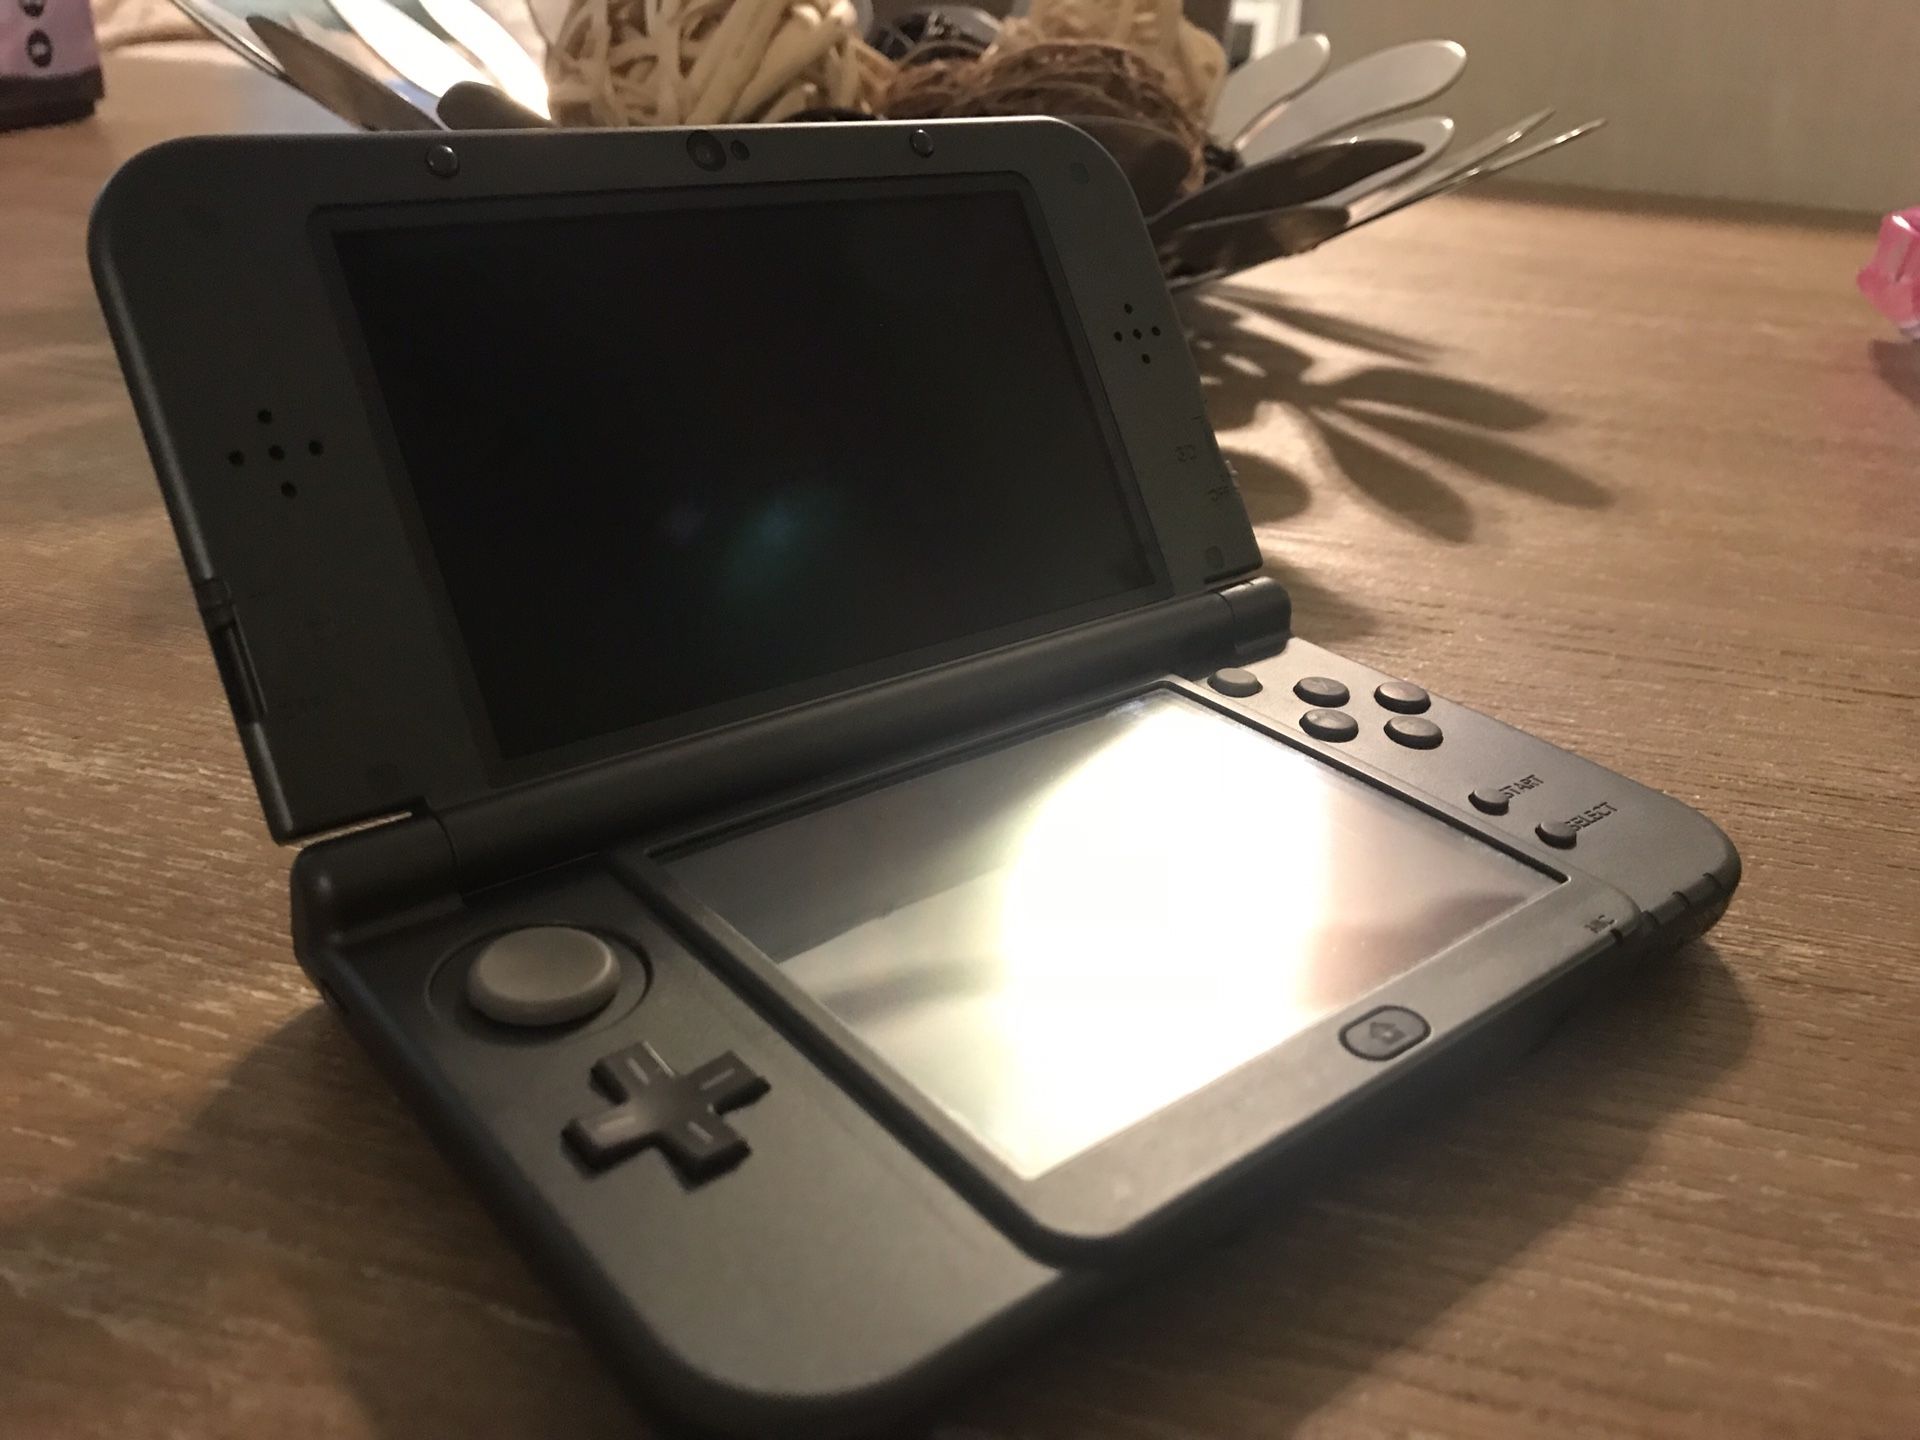 New Nintendo 3DS XL Black with Charger and Case